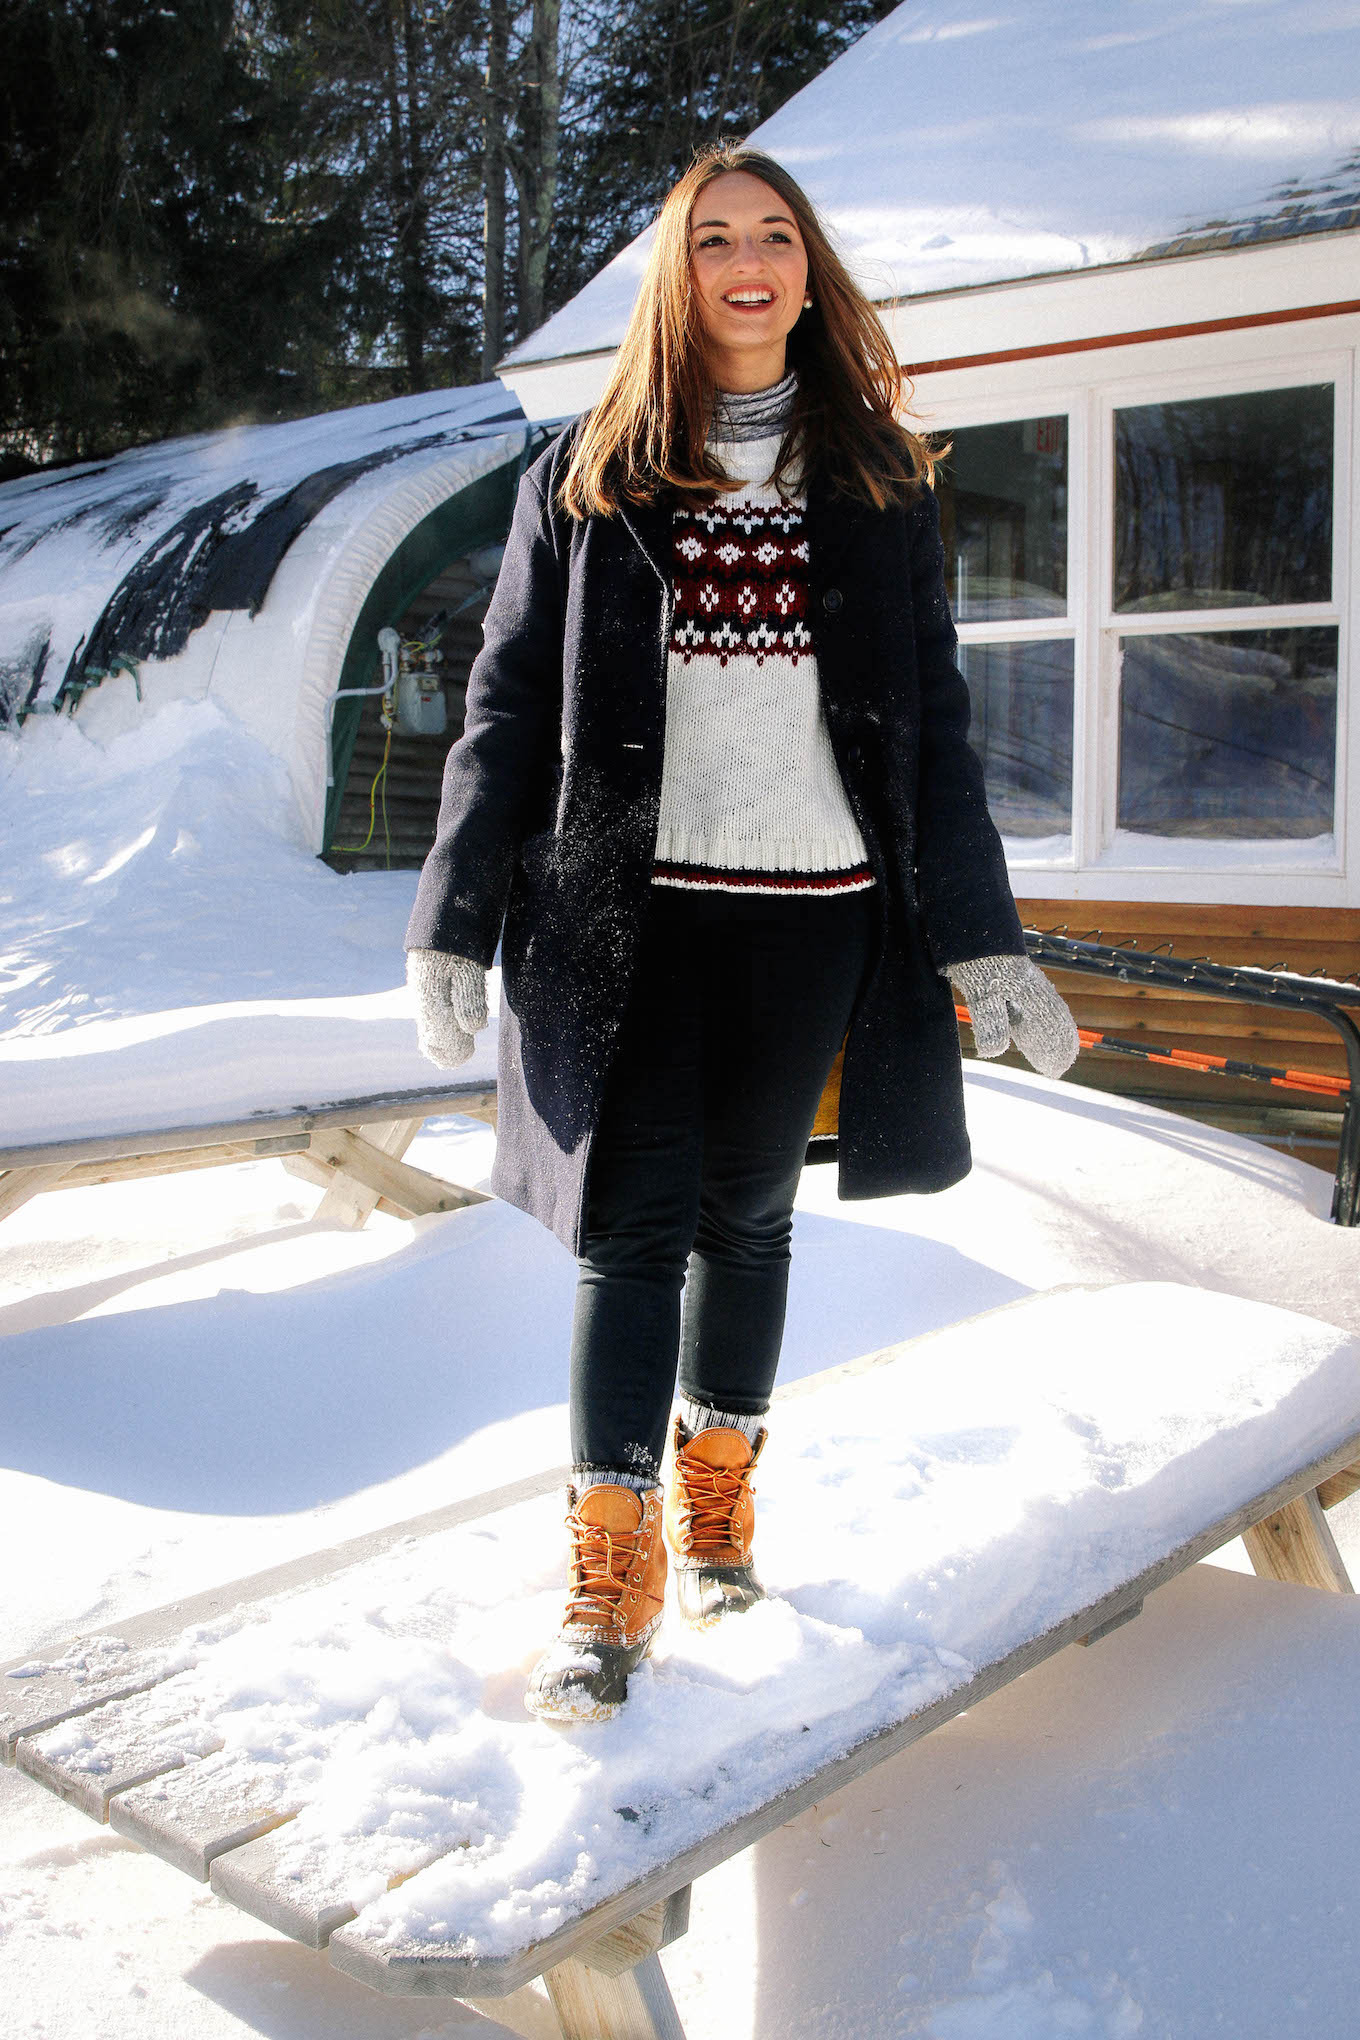 How To Properly Layer for New England's Cold Weather - The Coastal ...